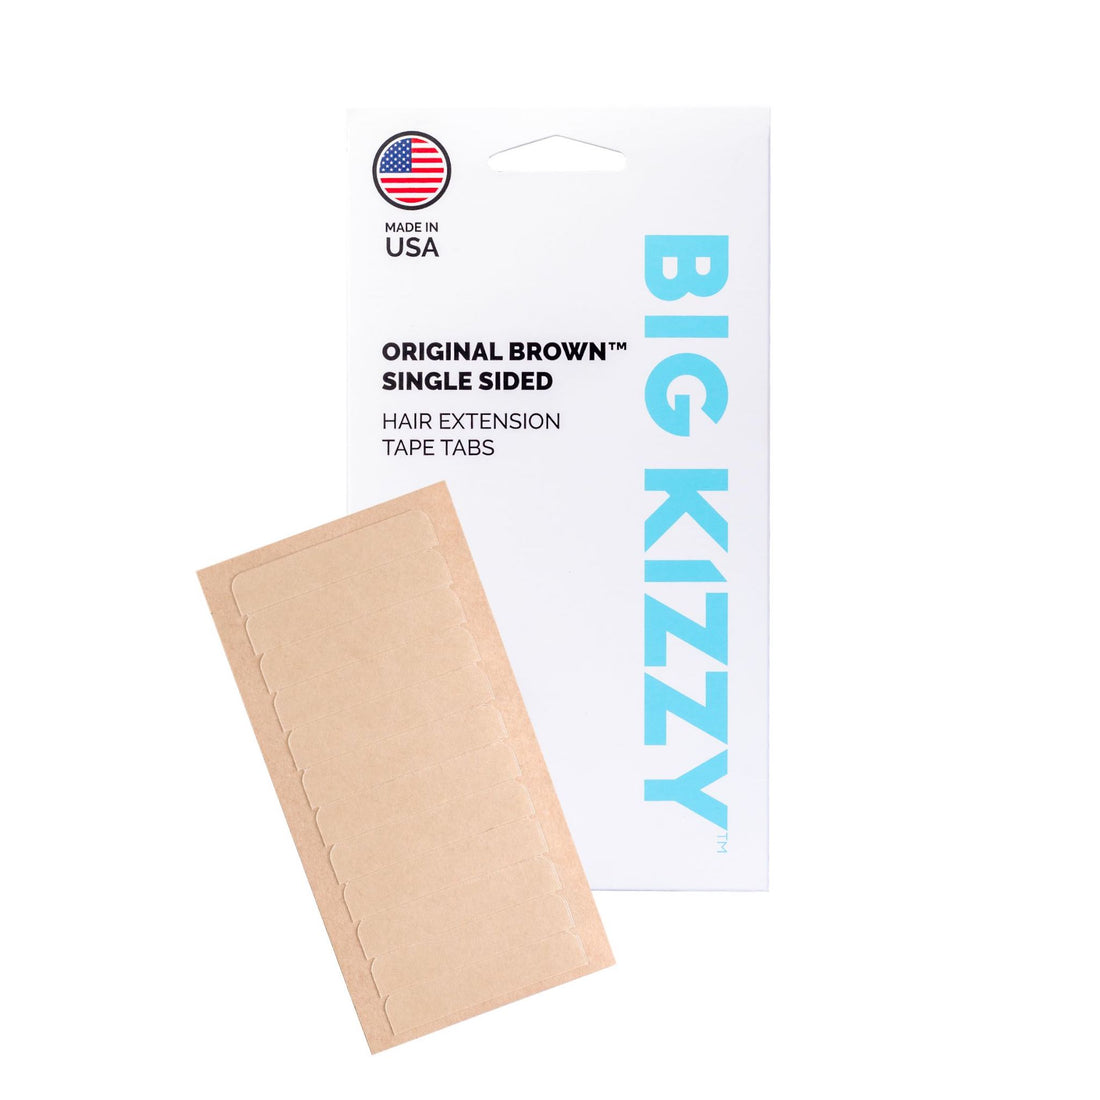 Big Kizzy® Original Brown Single Sided Hair Extension Replacement Tape Tabs Packaging with a sheet of brown single sided tape tabs overlayed on top of it